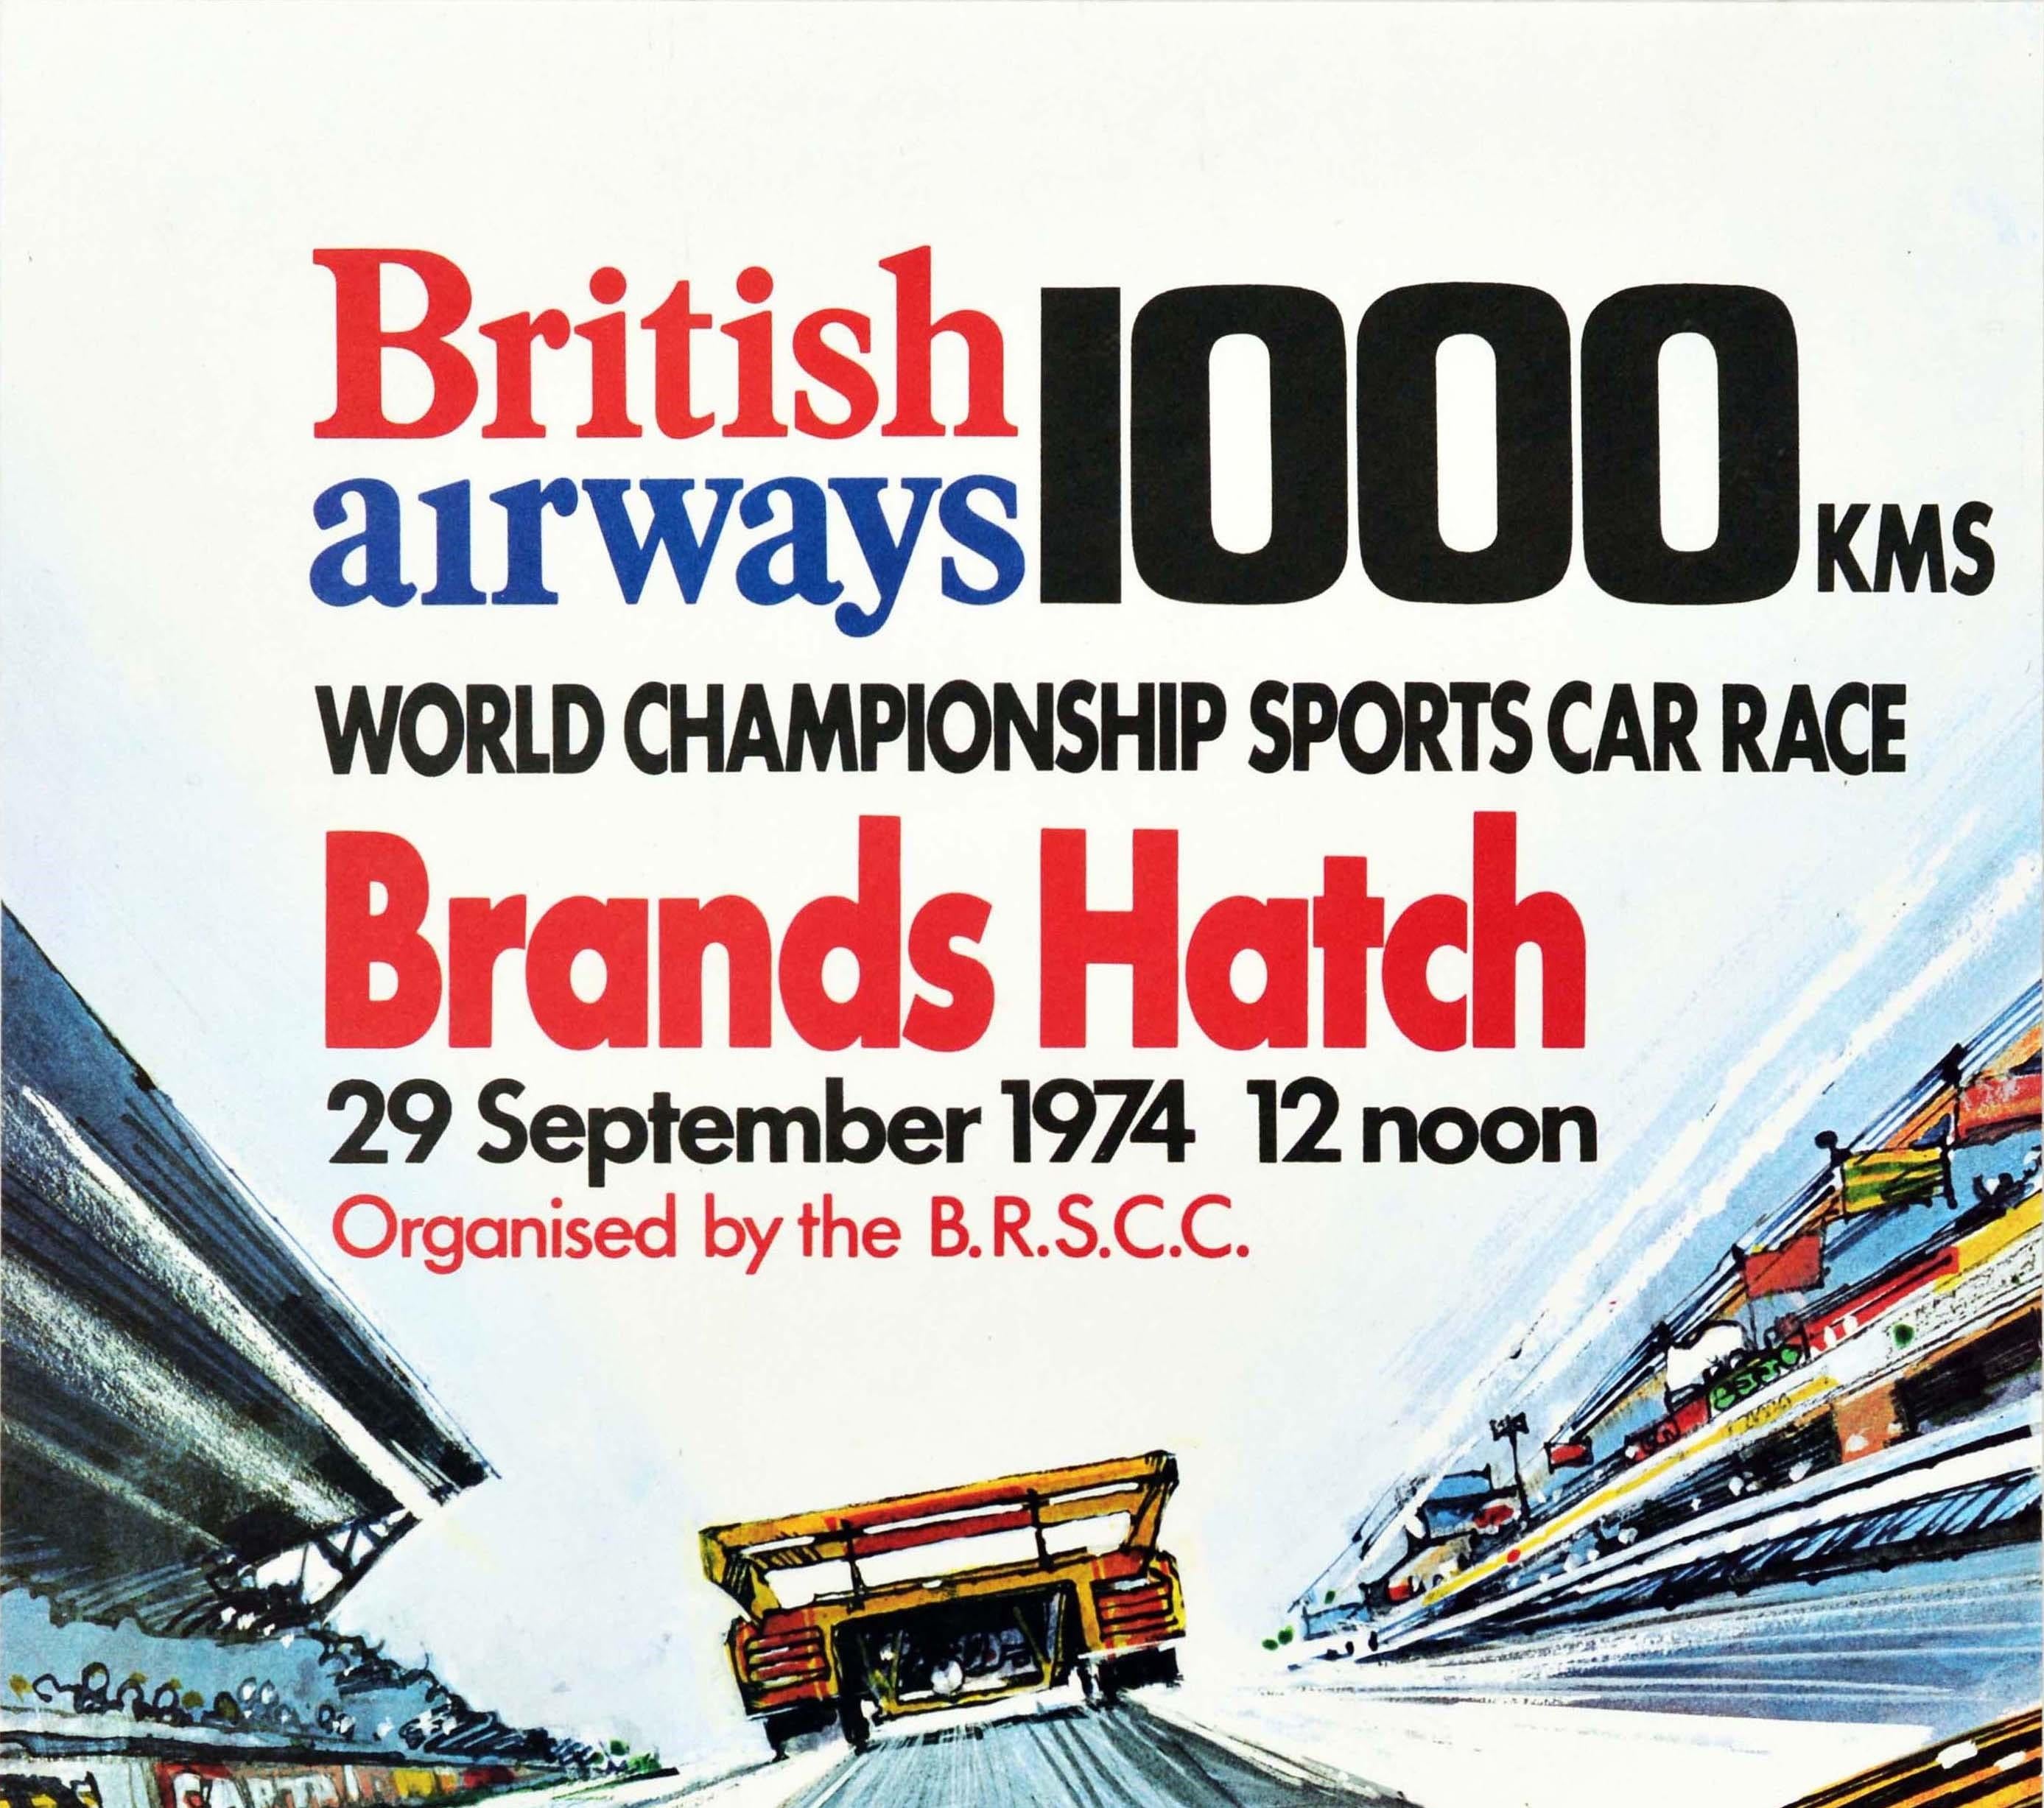 Original vintage motorsport poster for the British Airways 1000 kms World Championship Sports Car Race Brands Hatch on 29 September 1974 organised by the BRSCC (the British Racing and Sports Car Club formed in 1946) featuring a dynamic image from a